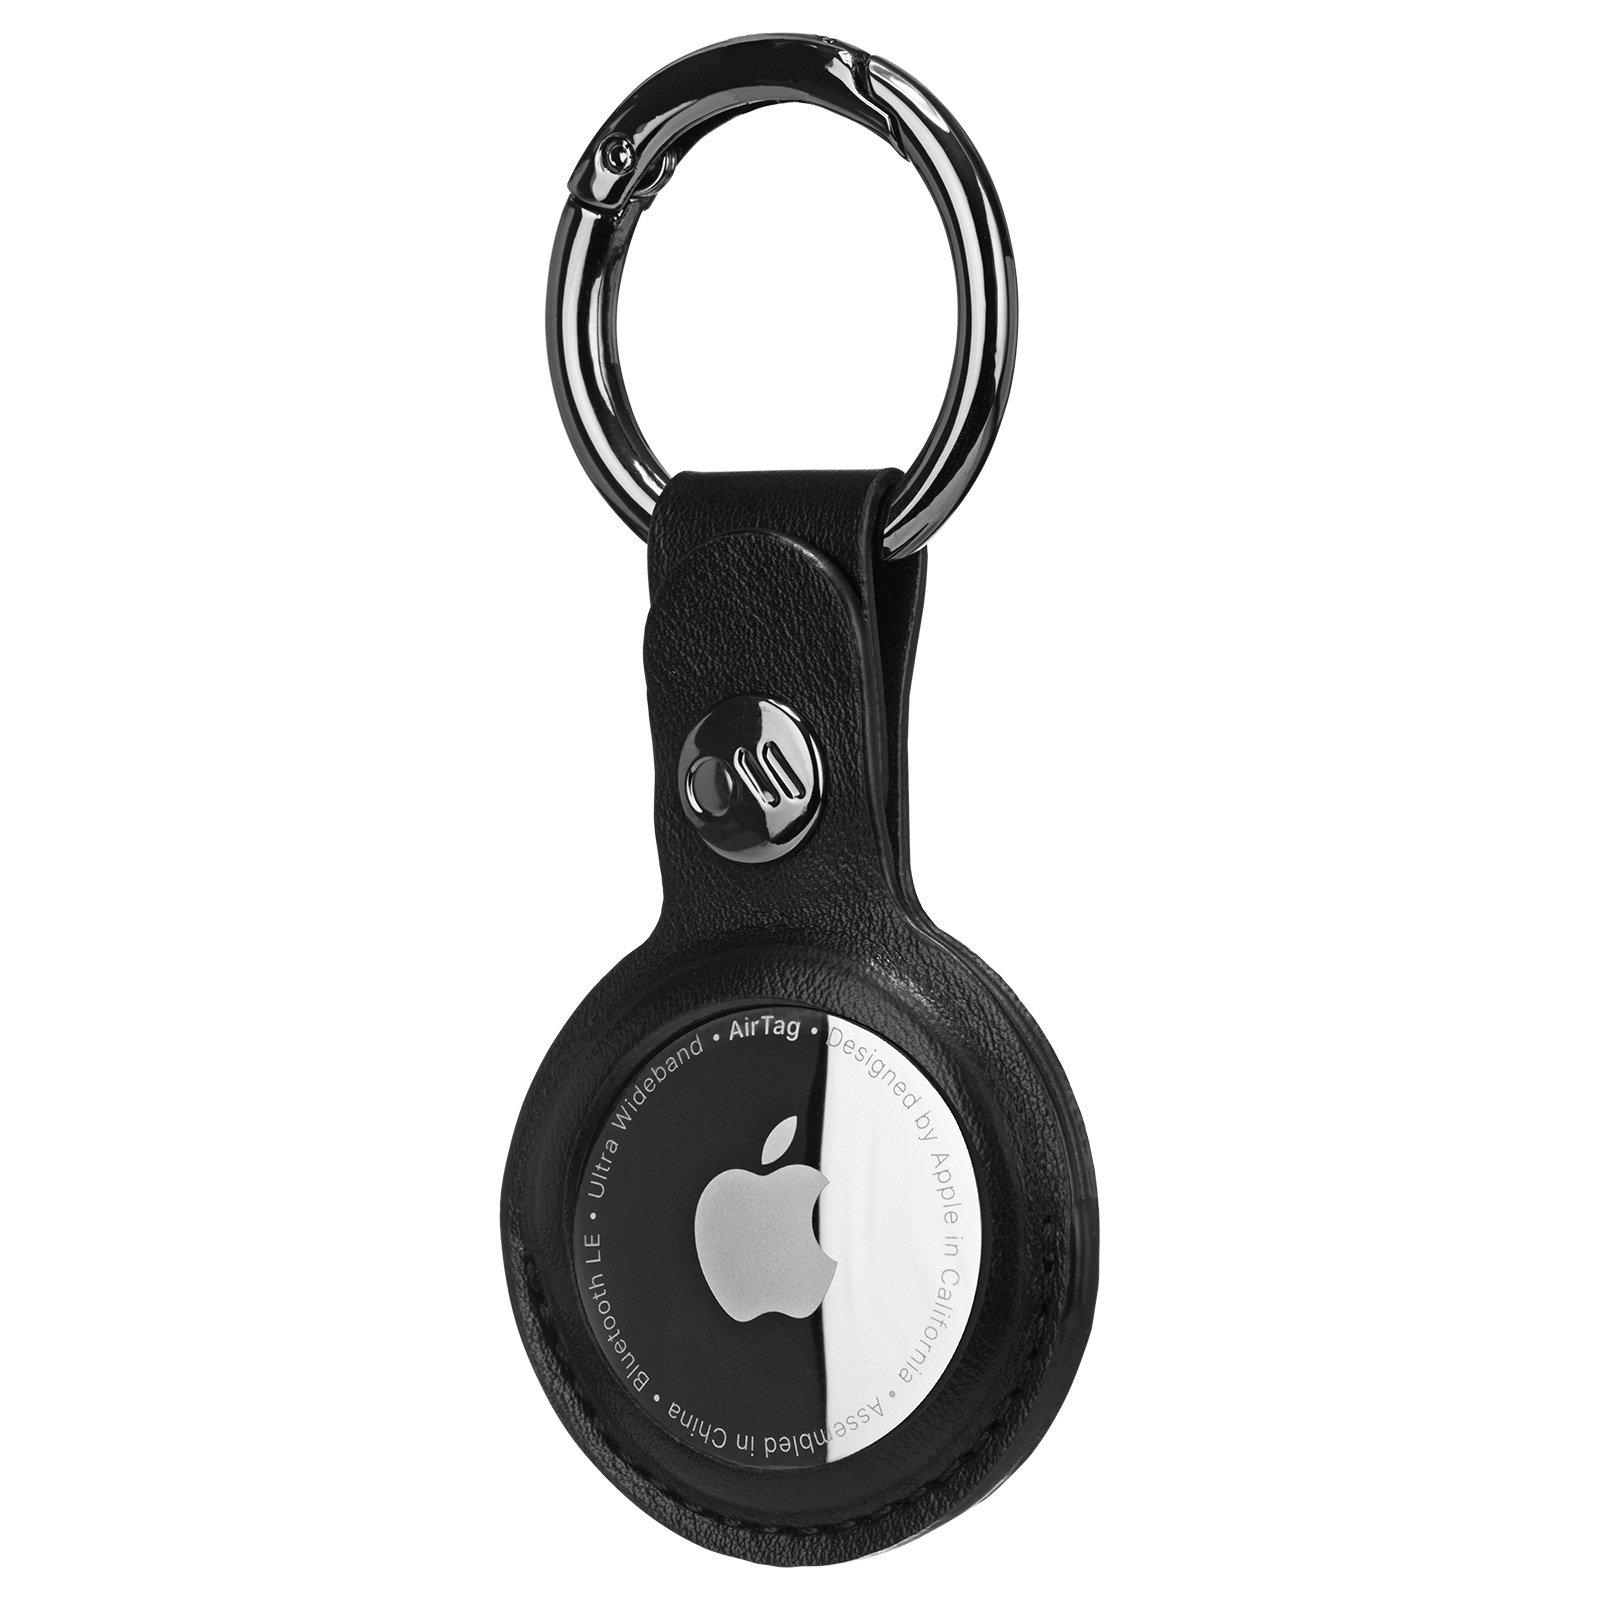 Airtag Holder with Keychain Carabiner - Secure Case for Apple